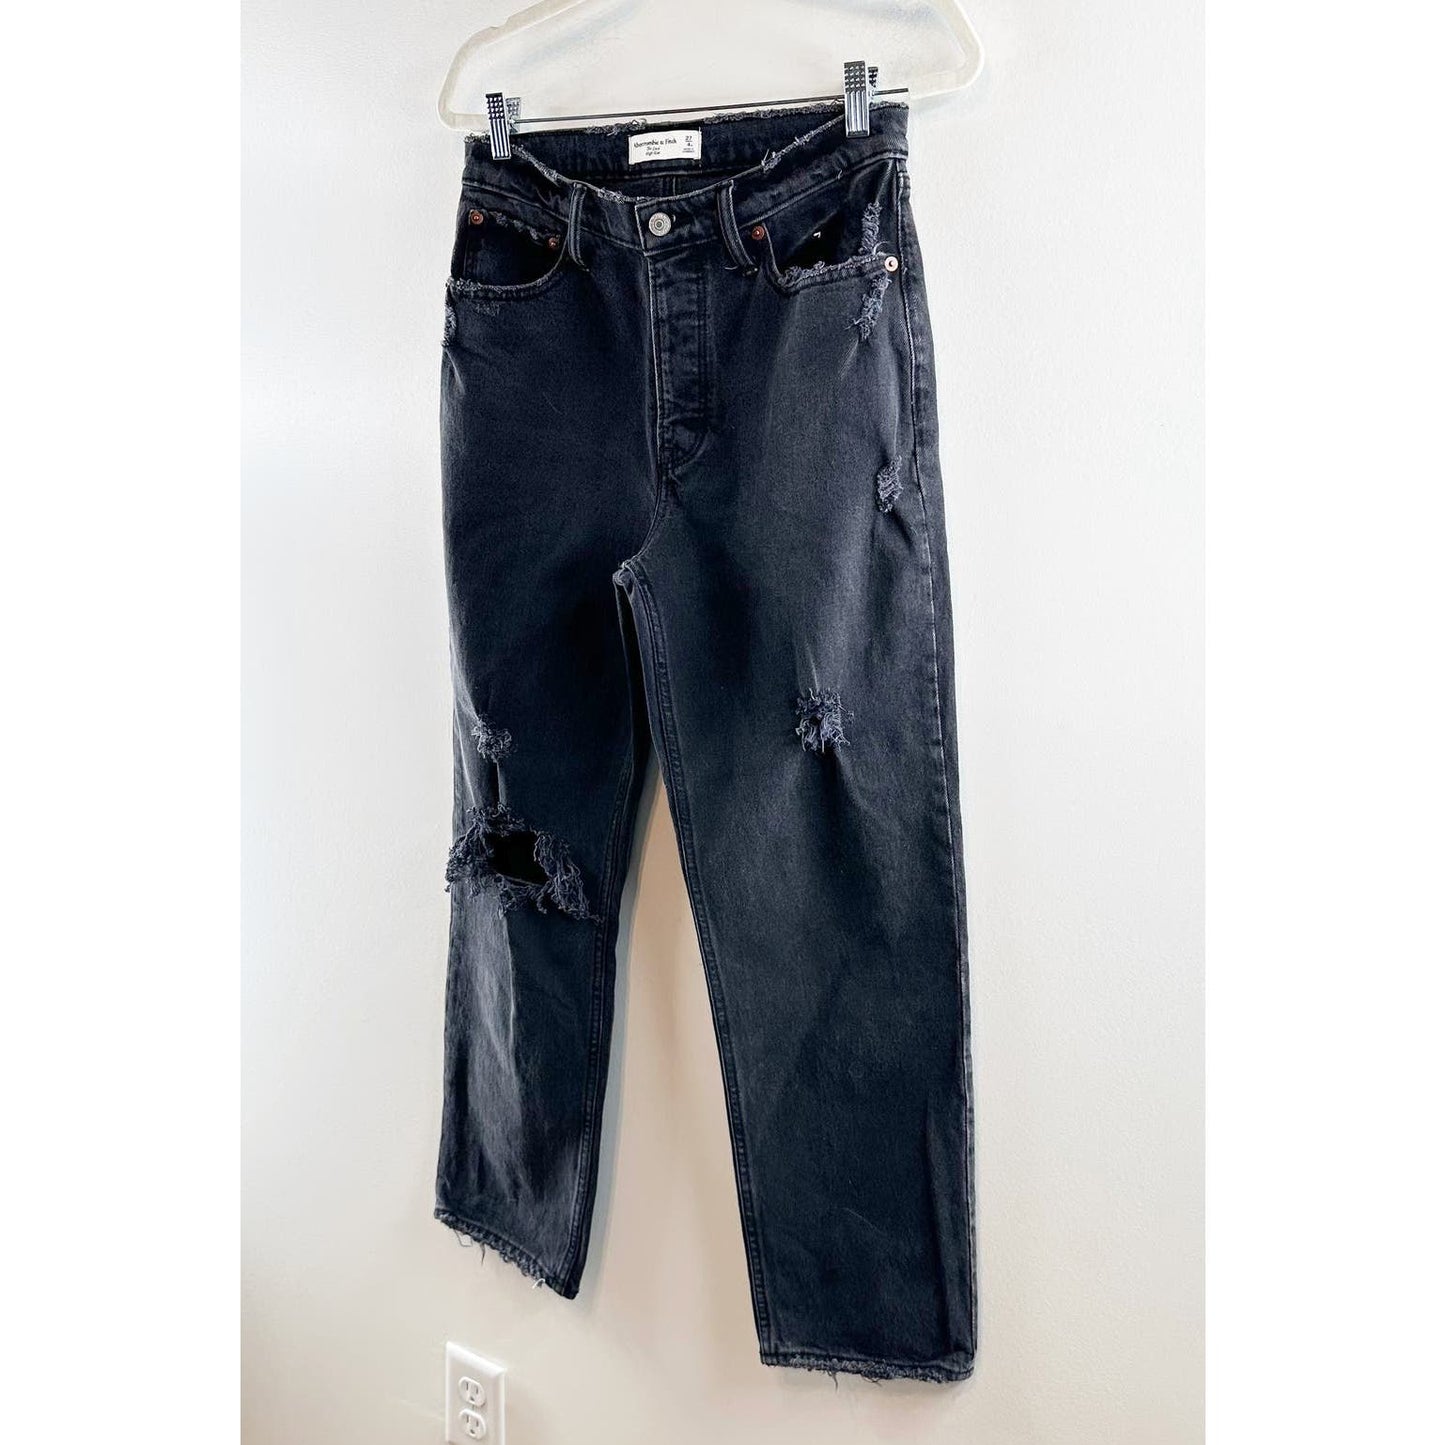 Abercrombie & Fitch The Dad High Rise Distressed Black Jeans 4 Petite